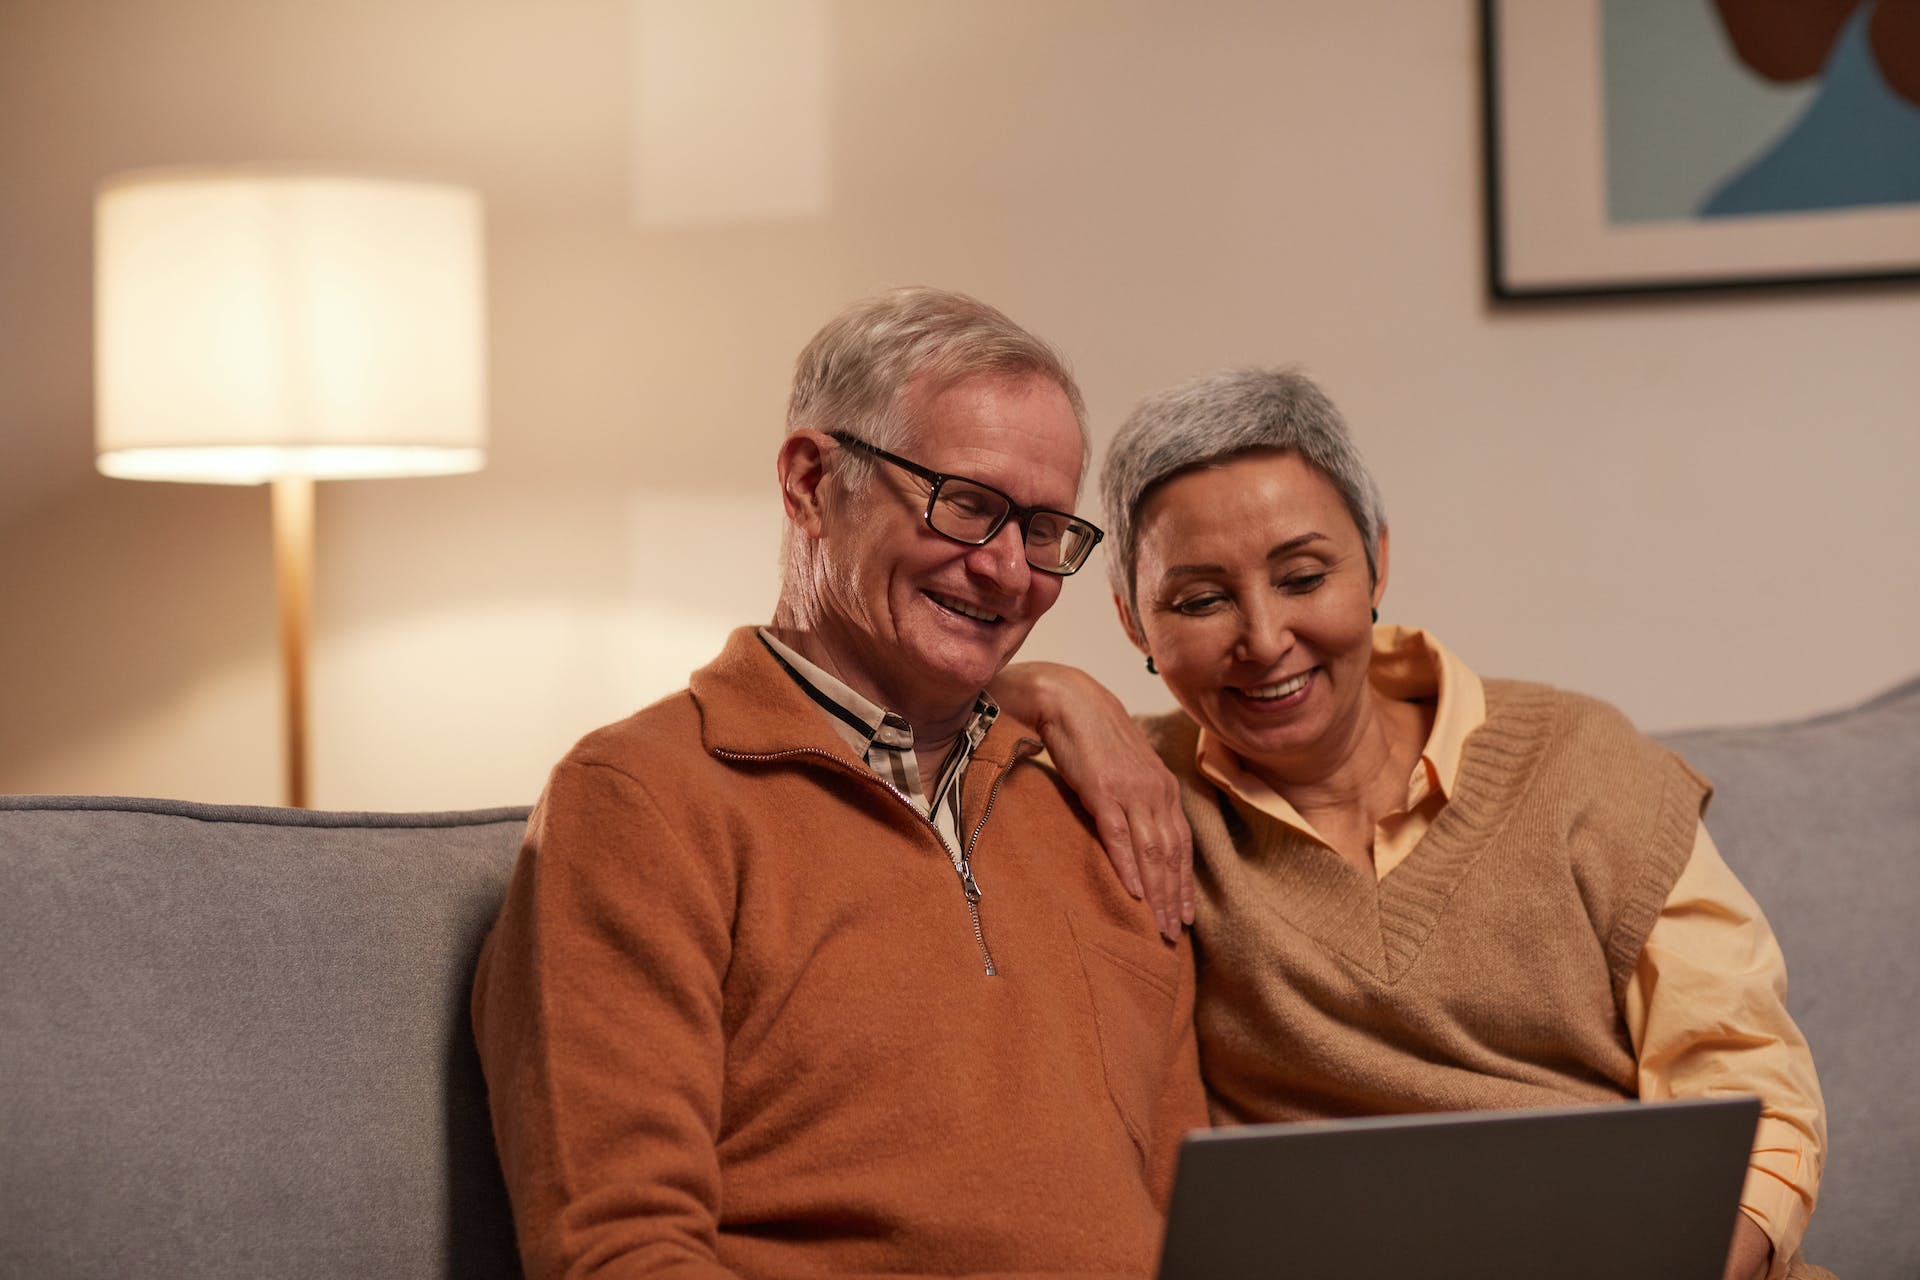 A Caregiver’s Guide: Cyber Security and Internet Safety for Seniors